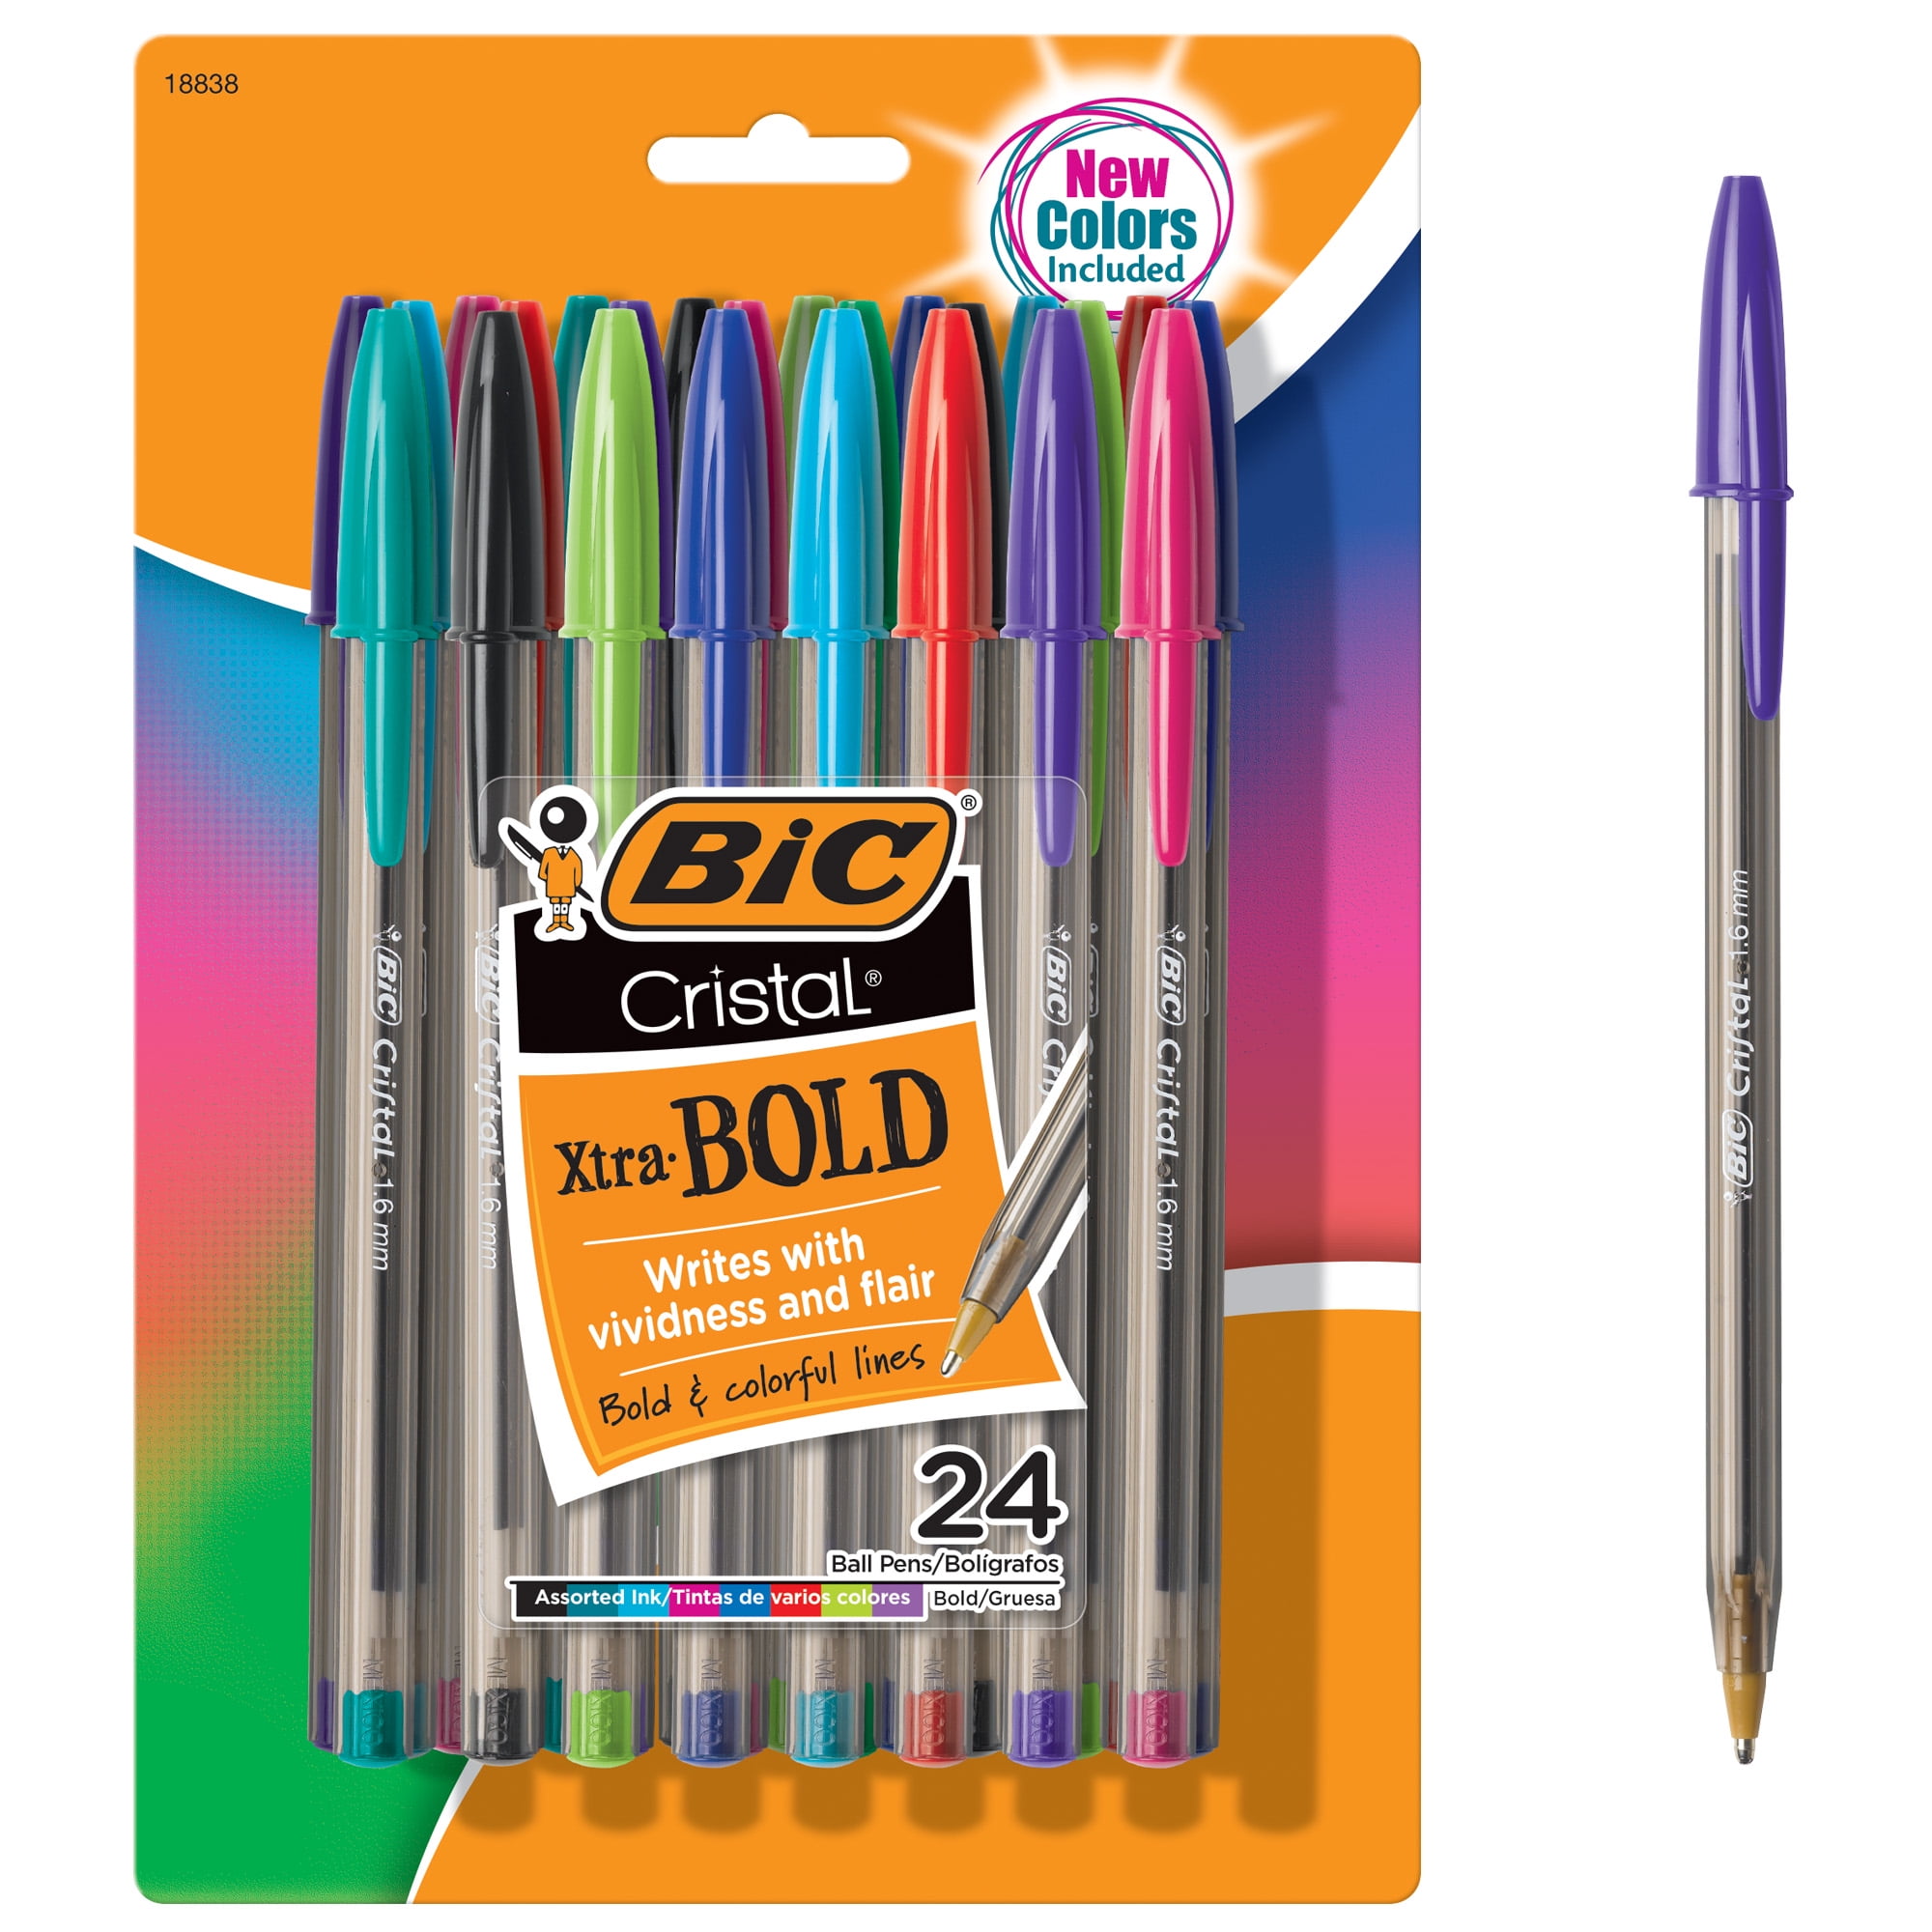 BIC Cristal Xtra Bold Ballpoint Pens 1.6mm 8 Assorted Colors for sale online 